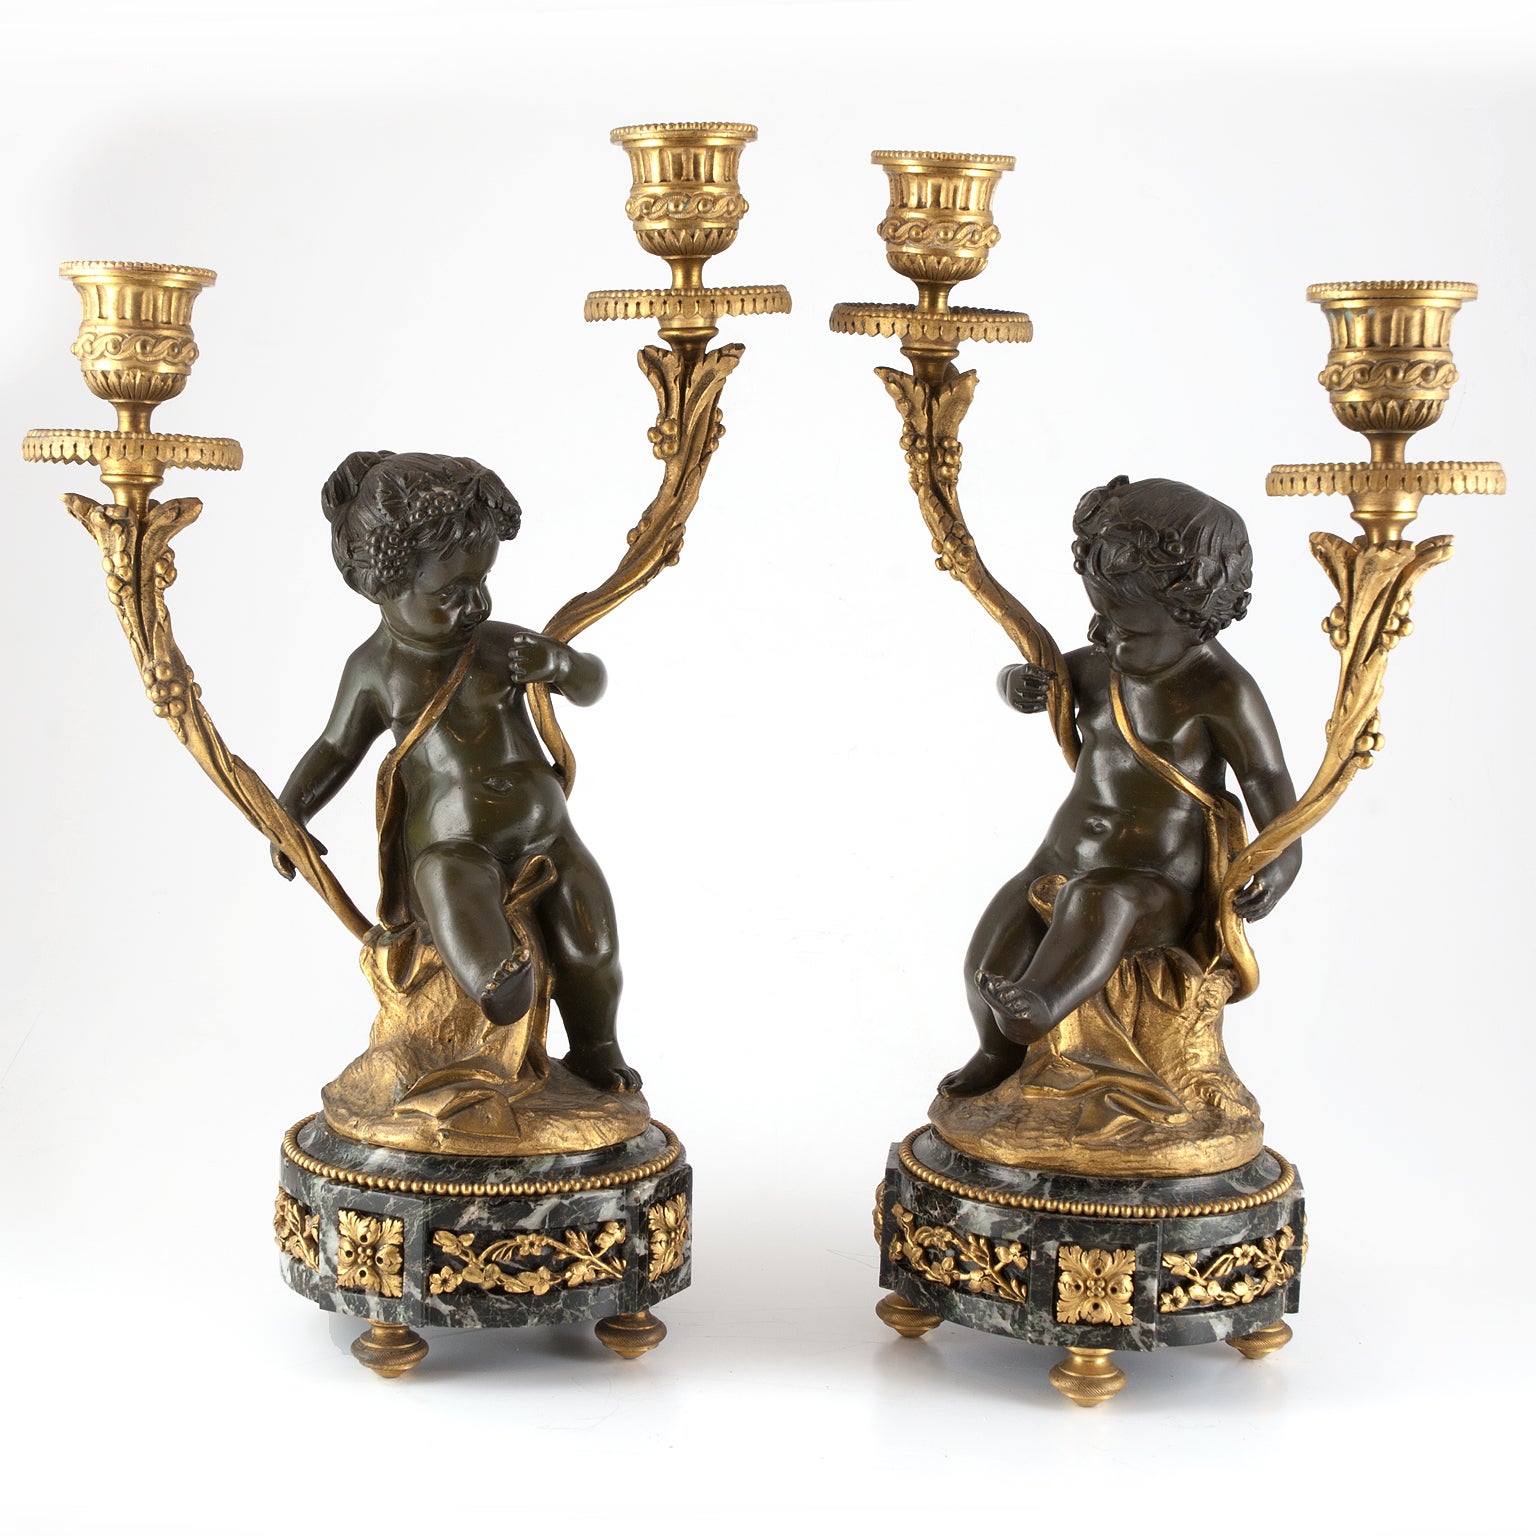 Pair of Candelabrum Signed Clodion Circa 1900